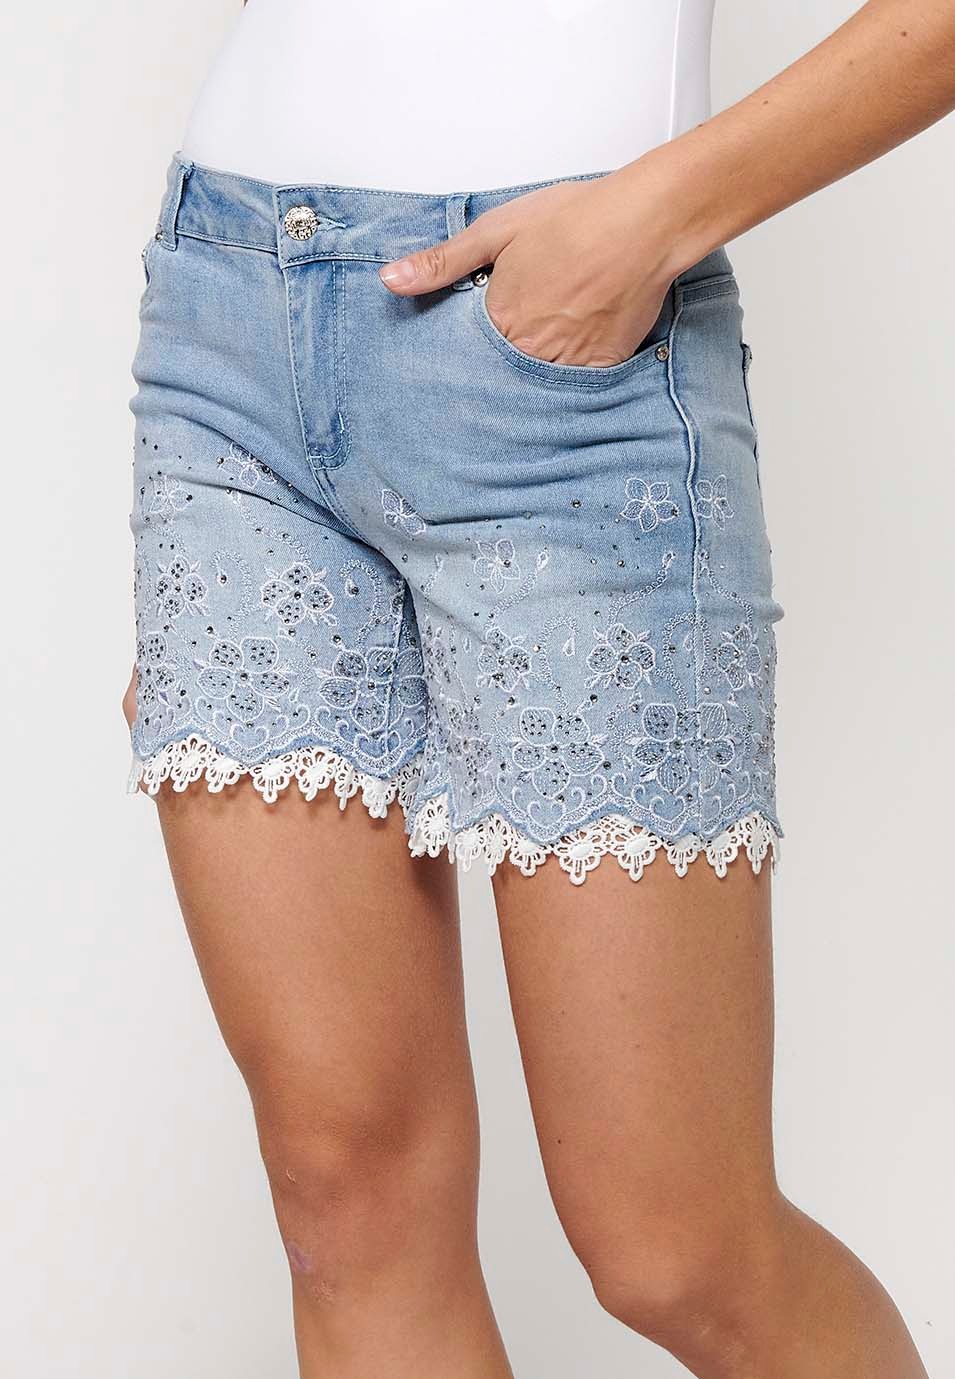 Short denim shorts finished with lace and floral embroidery with front closure with zipper and button with removable bow detail in Blue for Women 4